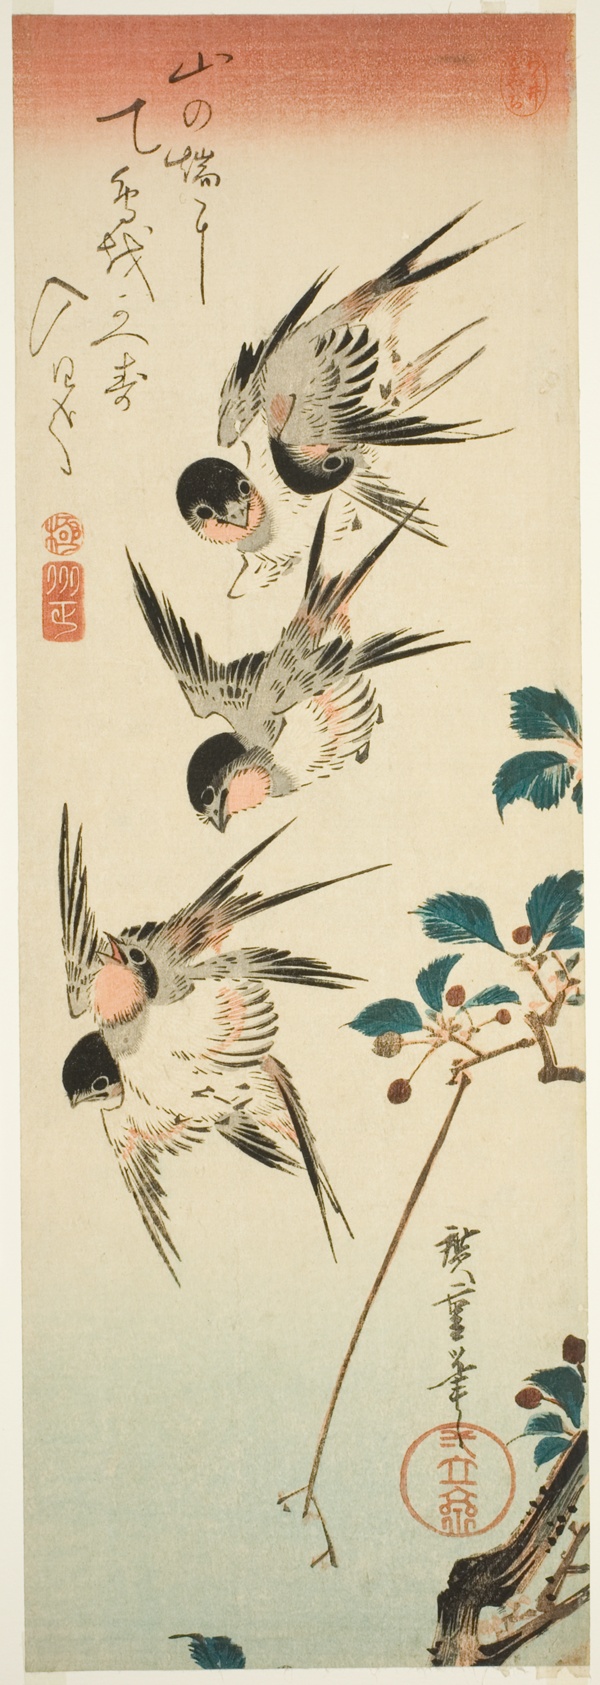 Swallows and Cherry Blossoms